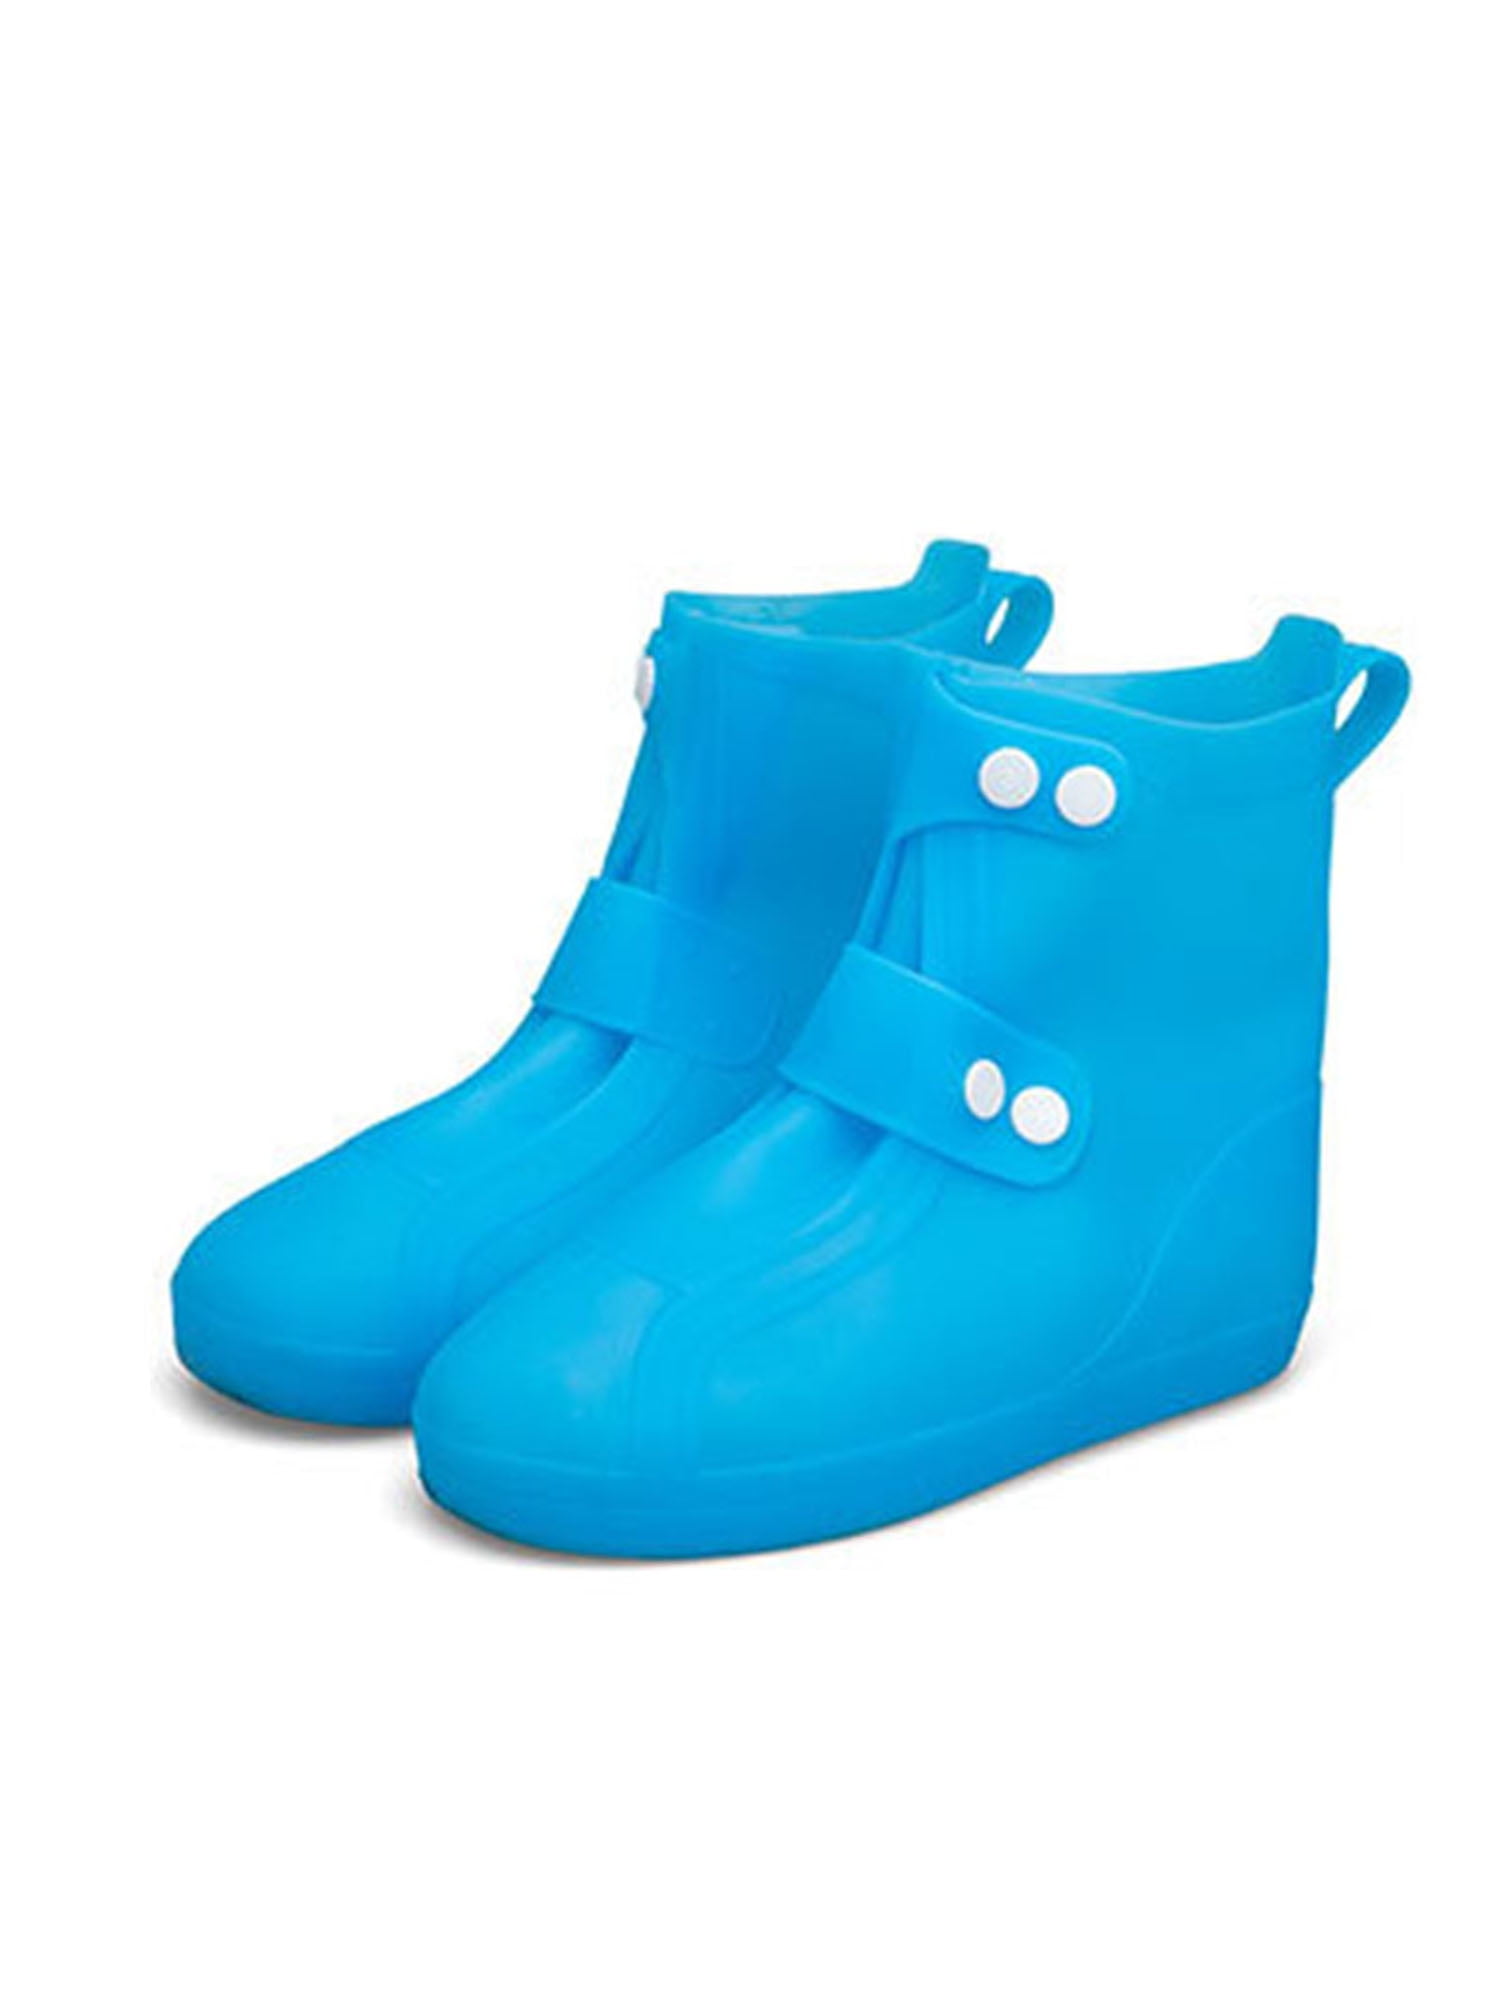 Children's buckle my shoe pattern wellingtons blue or pink welly rain boot 